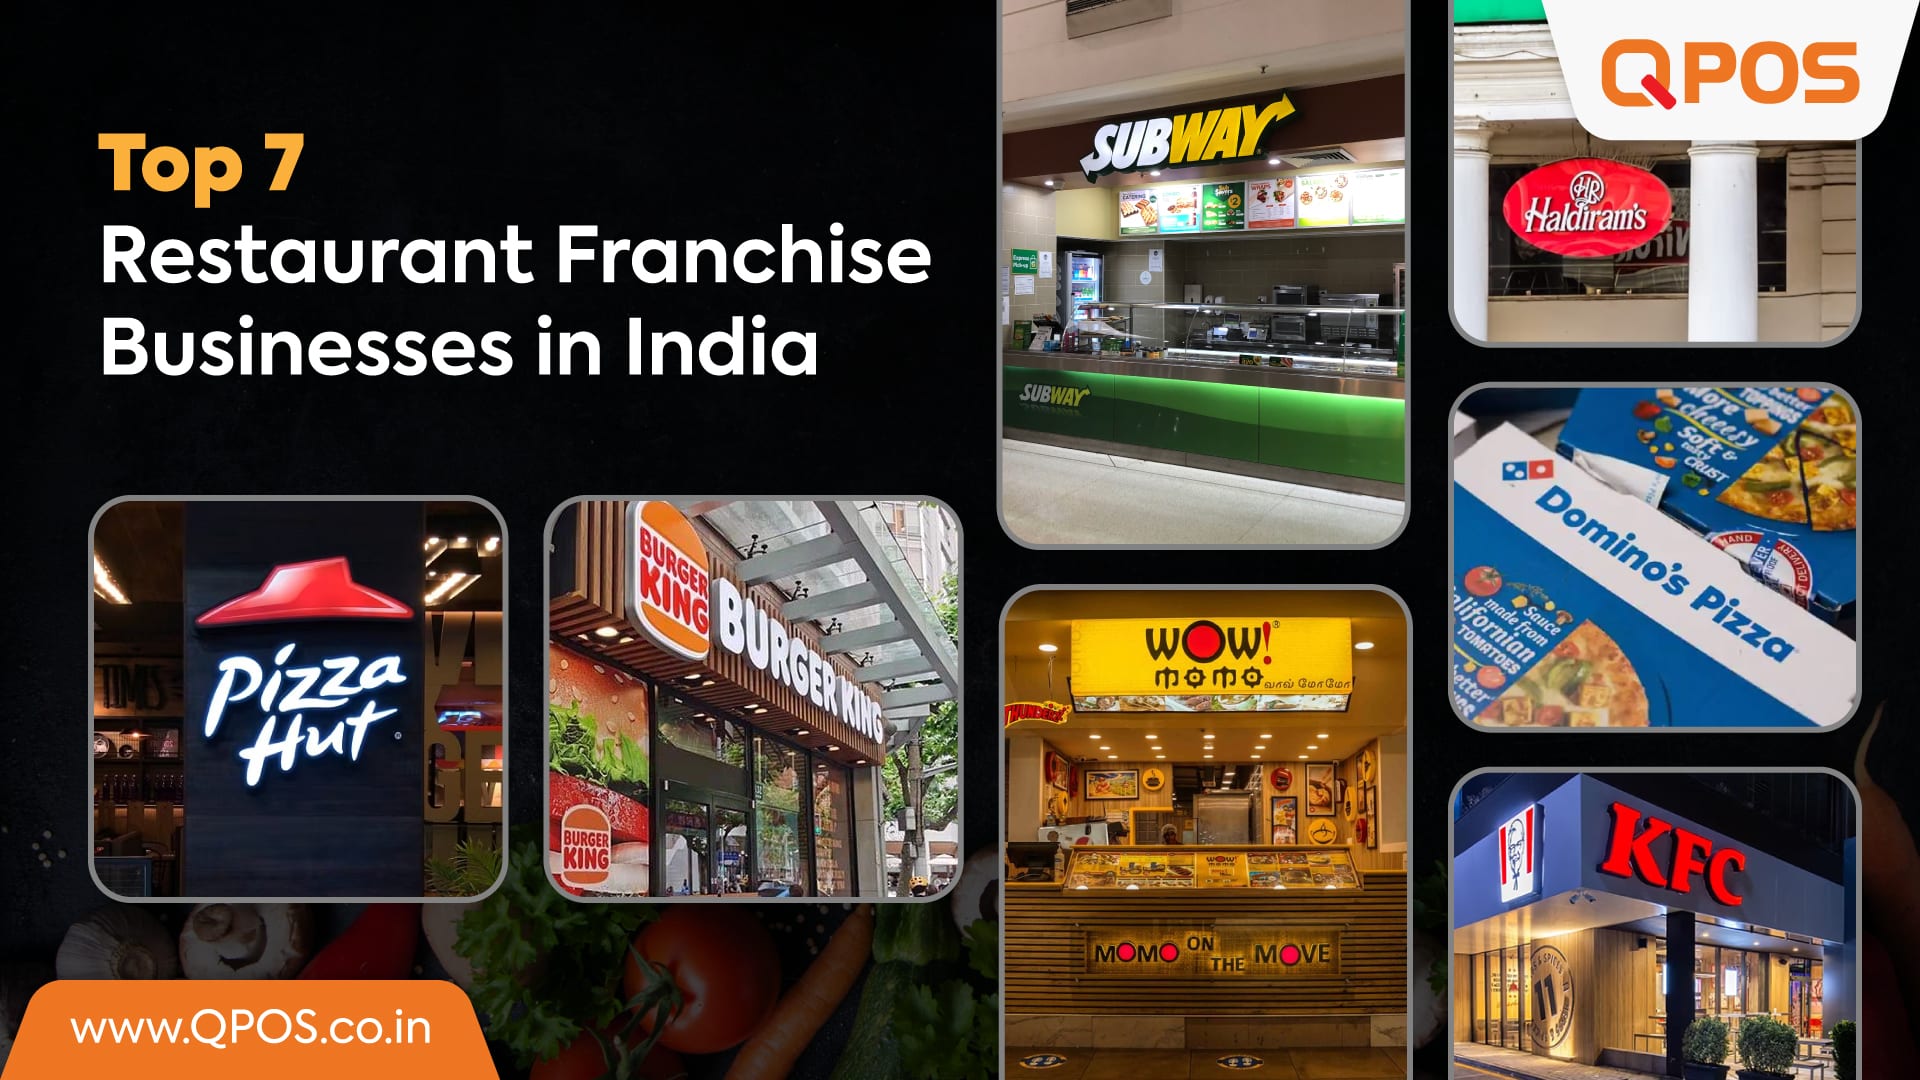 Top 7 Restaurant Franchise Businesses in India